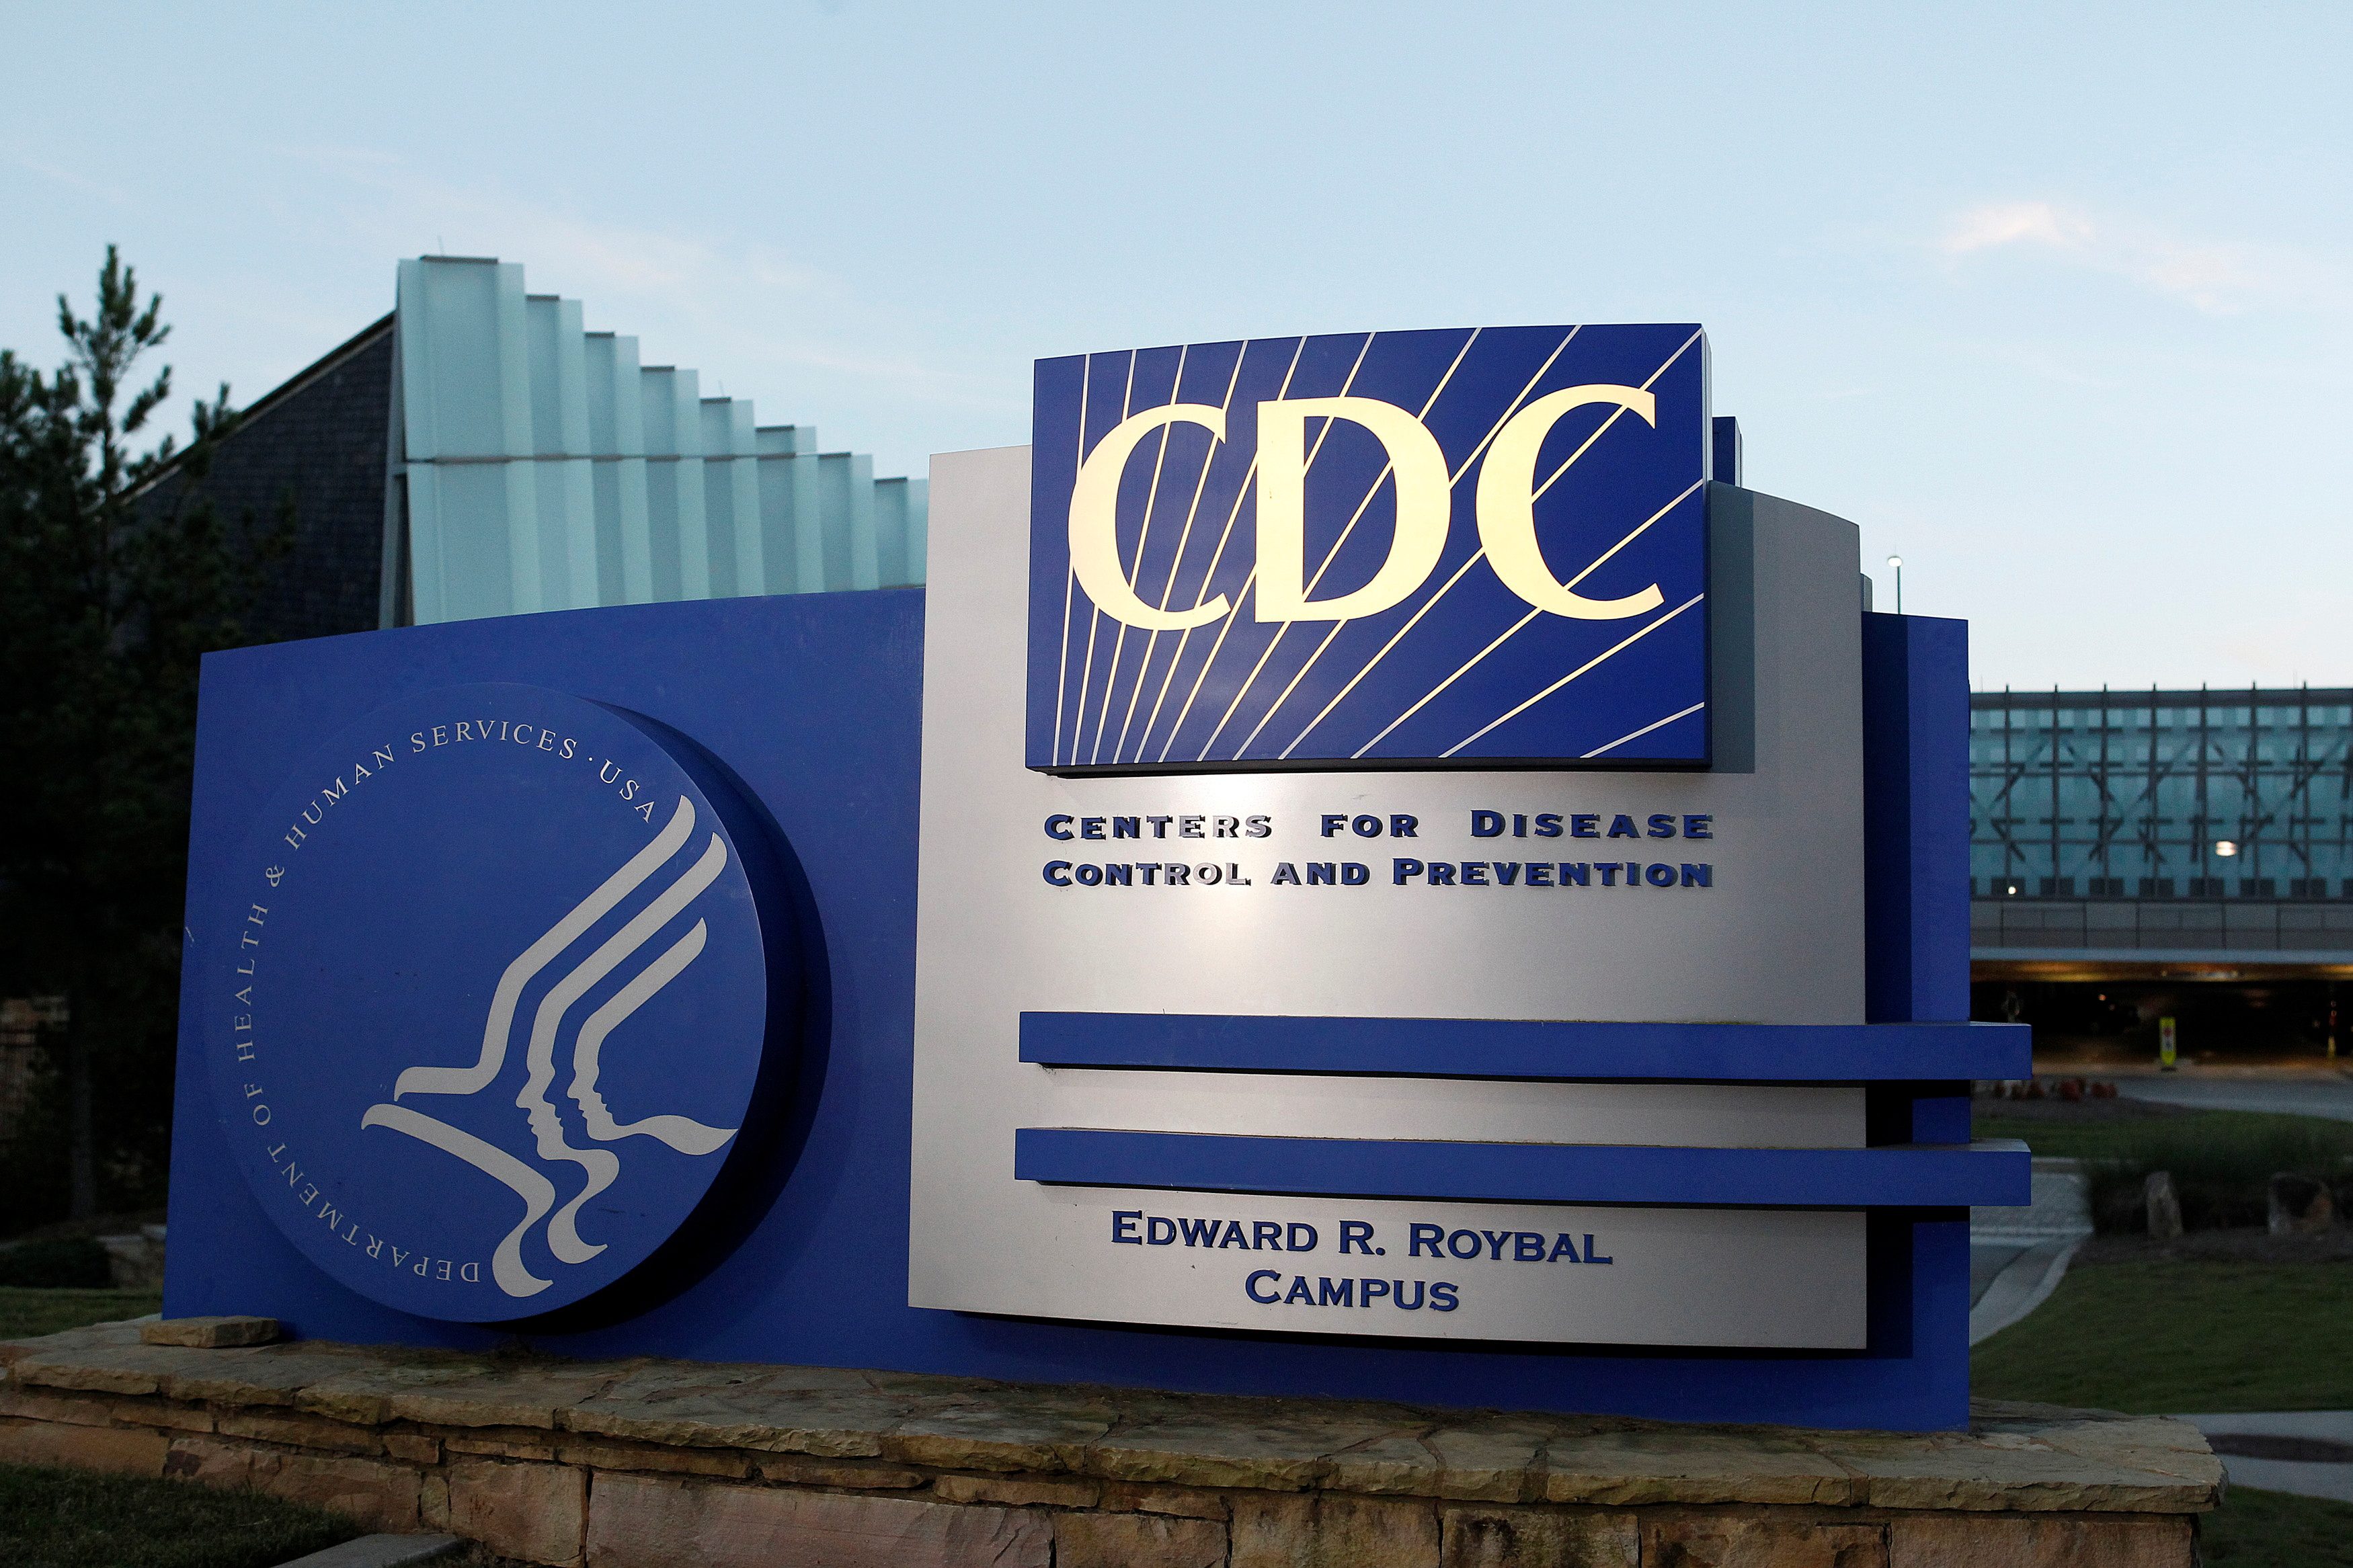 US CDC advisers back COVID-19 booster shots for those 65 and older, not for high-risk workers